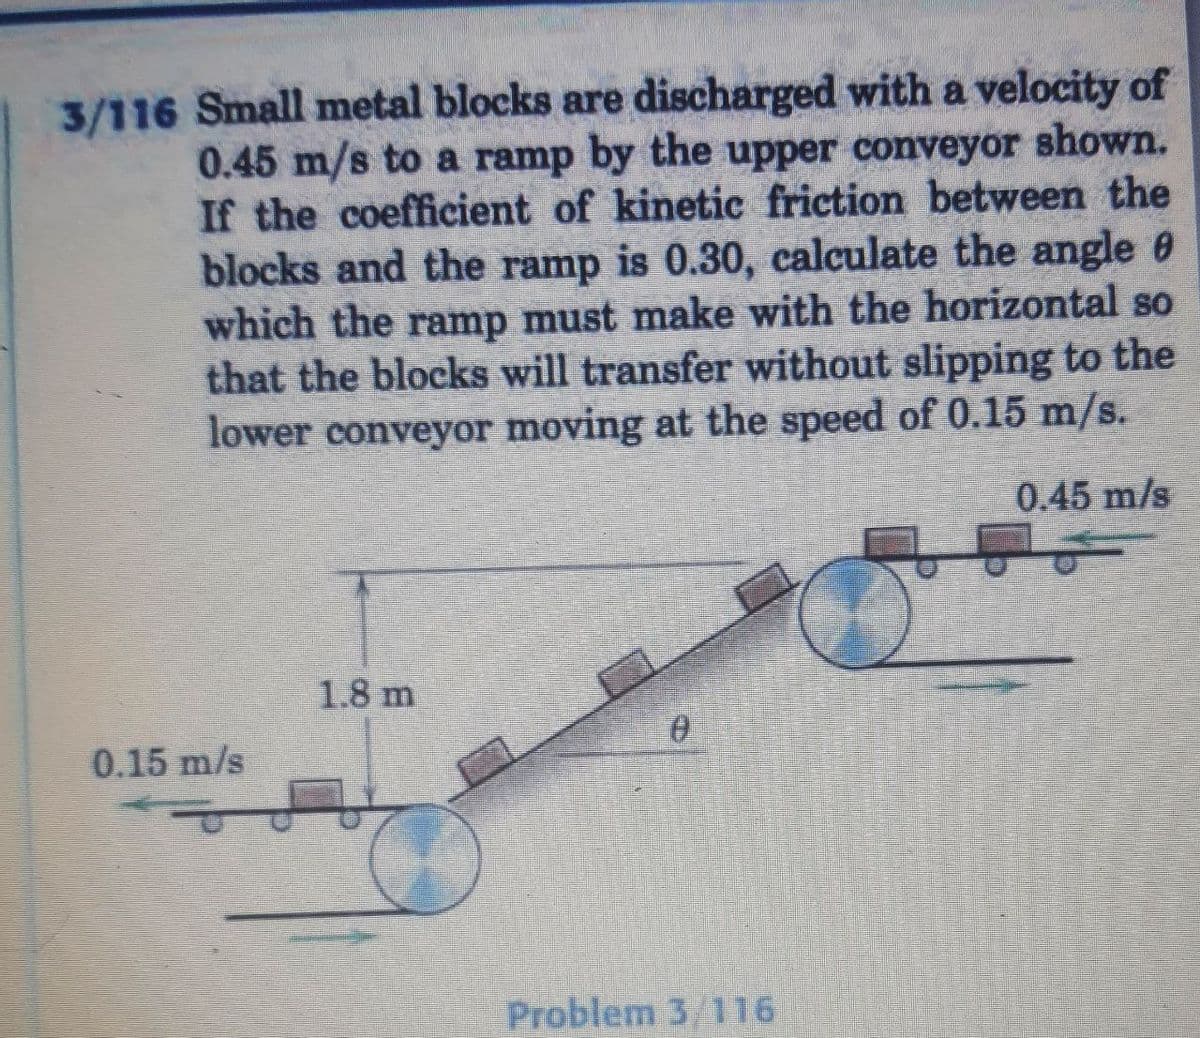 3/116 Small metal blocks are discharged with a velocity of
0.45 m/s to a ramp by the upper conveyor shown.
If the coefficient of kinetic friction between the
blocks and the ramp is 0.30, calculate the angle
which the ramp must make with the horizontal so
that the blocks will transfer without slipping to the
lower conveyor moving at the speed of 0.15 m/s.
0.45 m/s
1.8 m
0
Problem 3/116
0.15 m/s